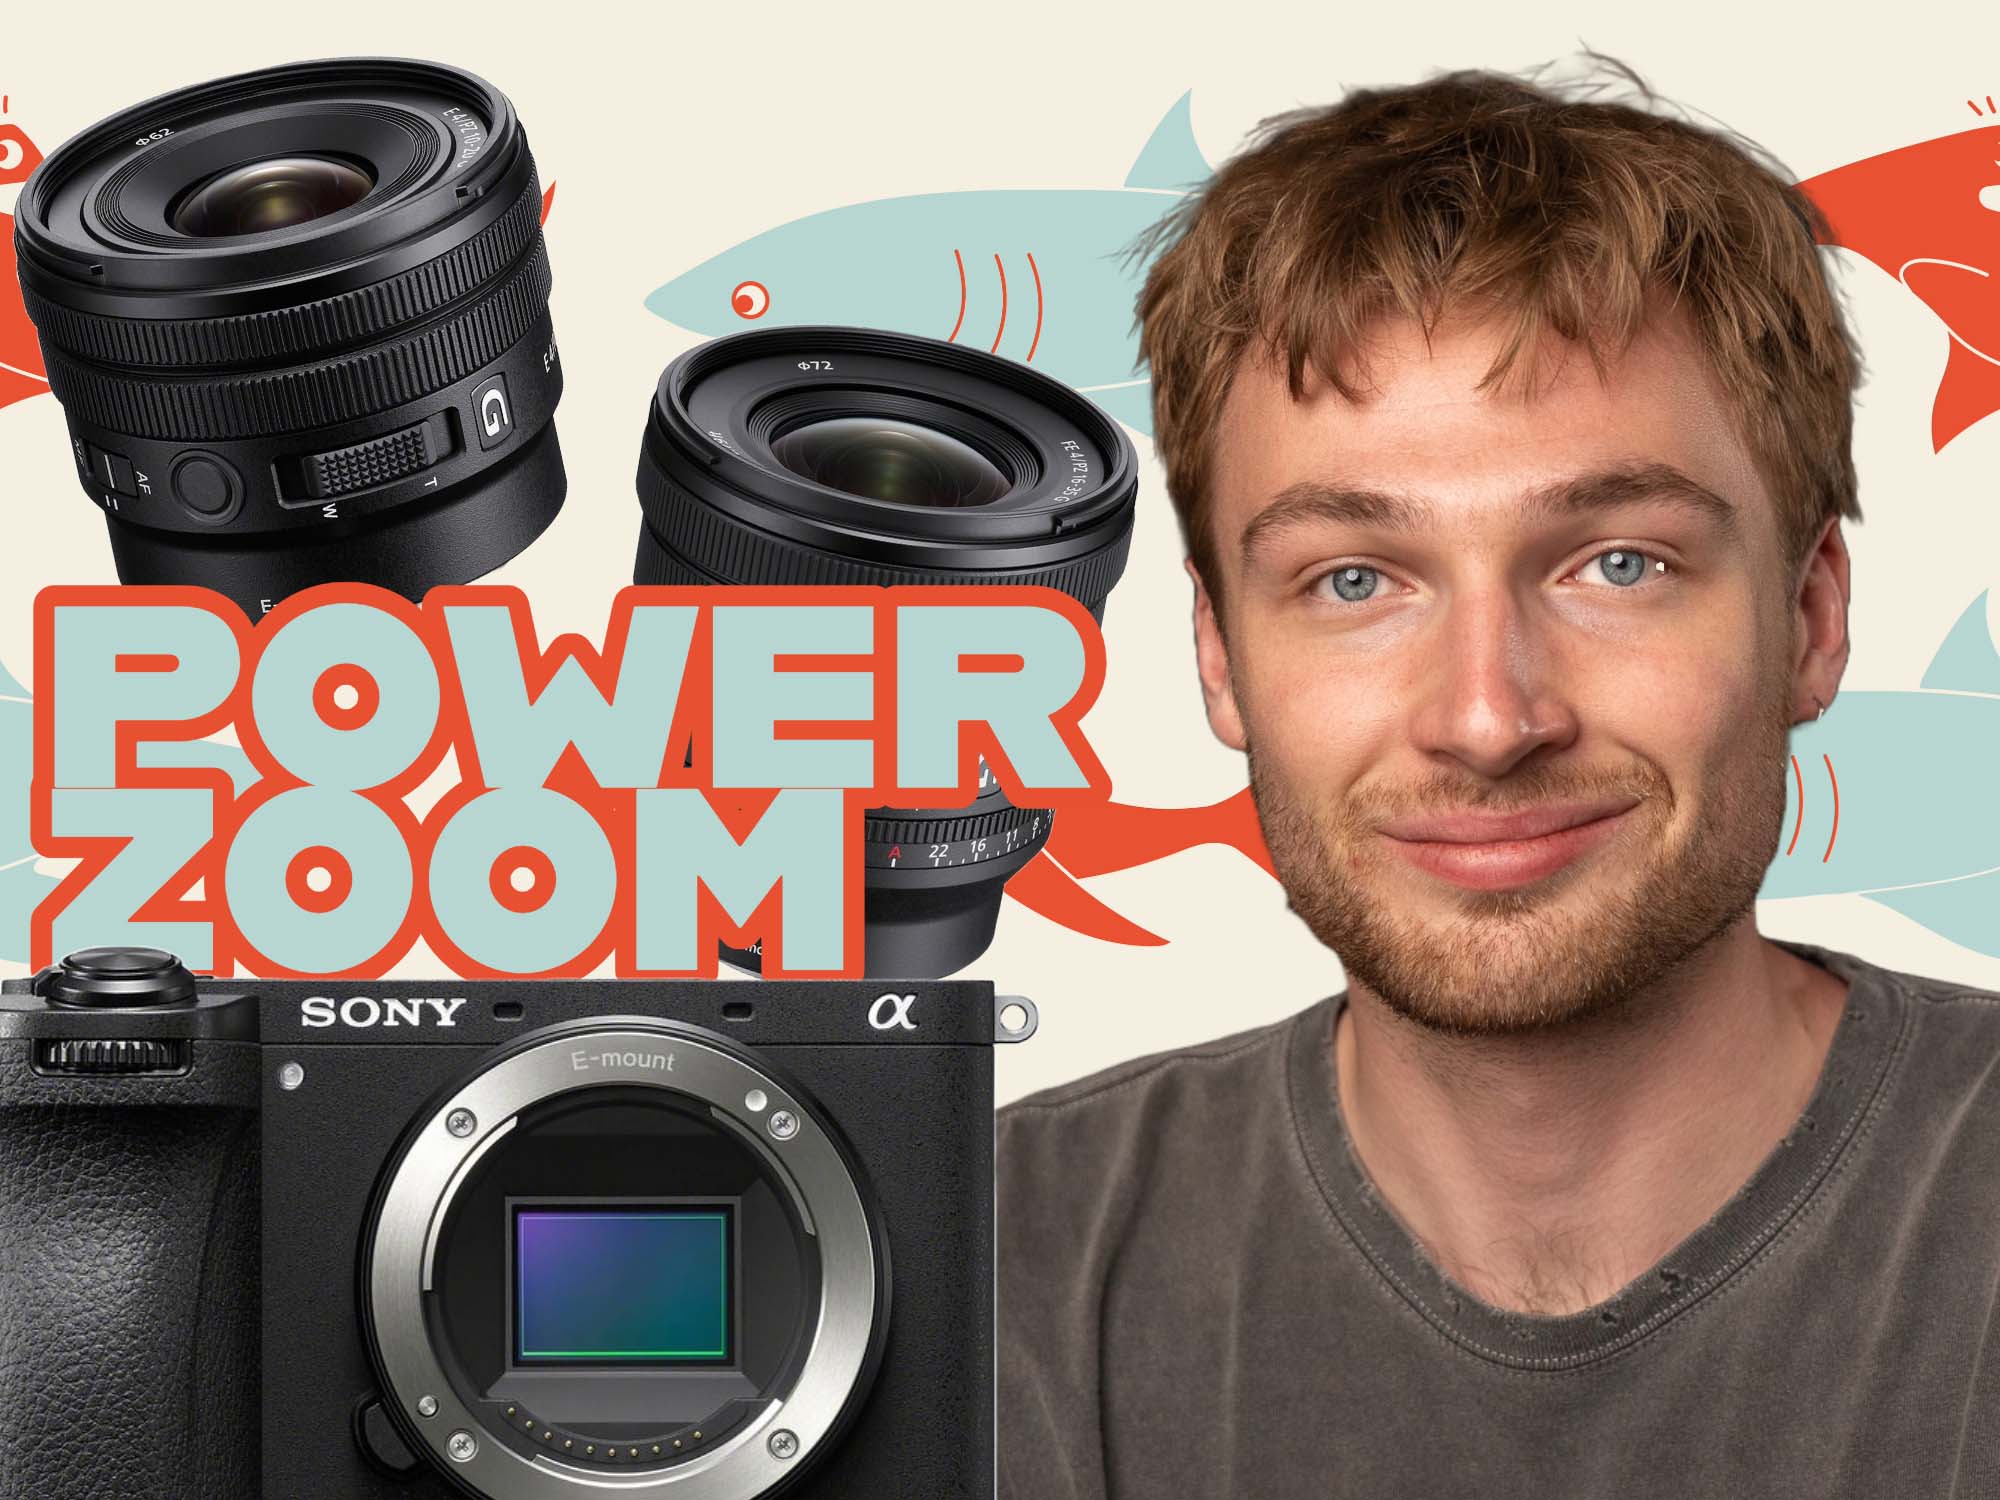 POWER ZOOM Your Sony PZ Lens Underwater [VIDEO]